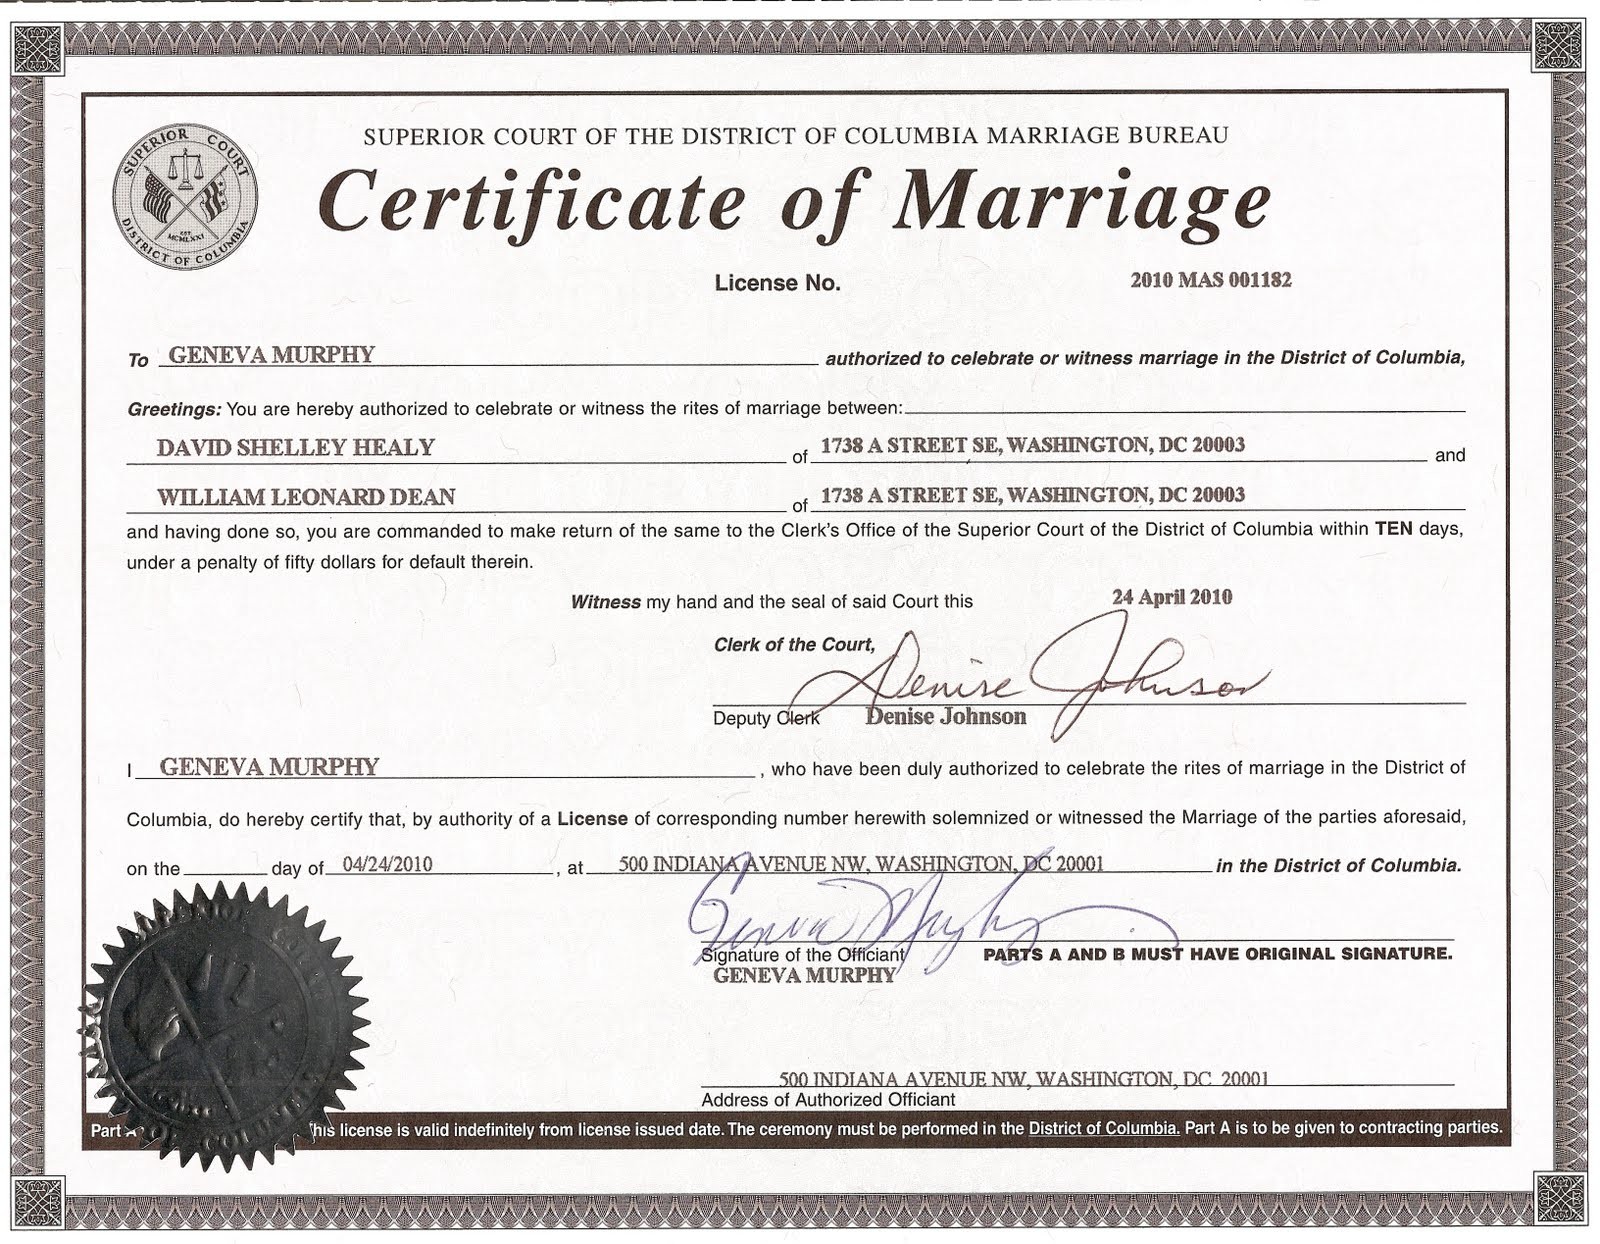 How Can I Get A Copy Of My Marriage Certificate Online In India